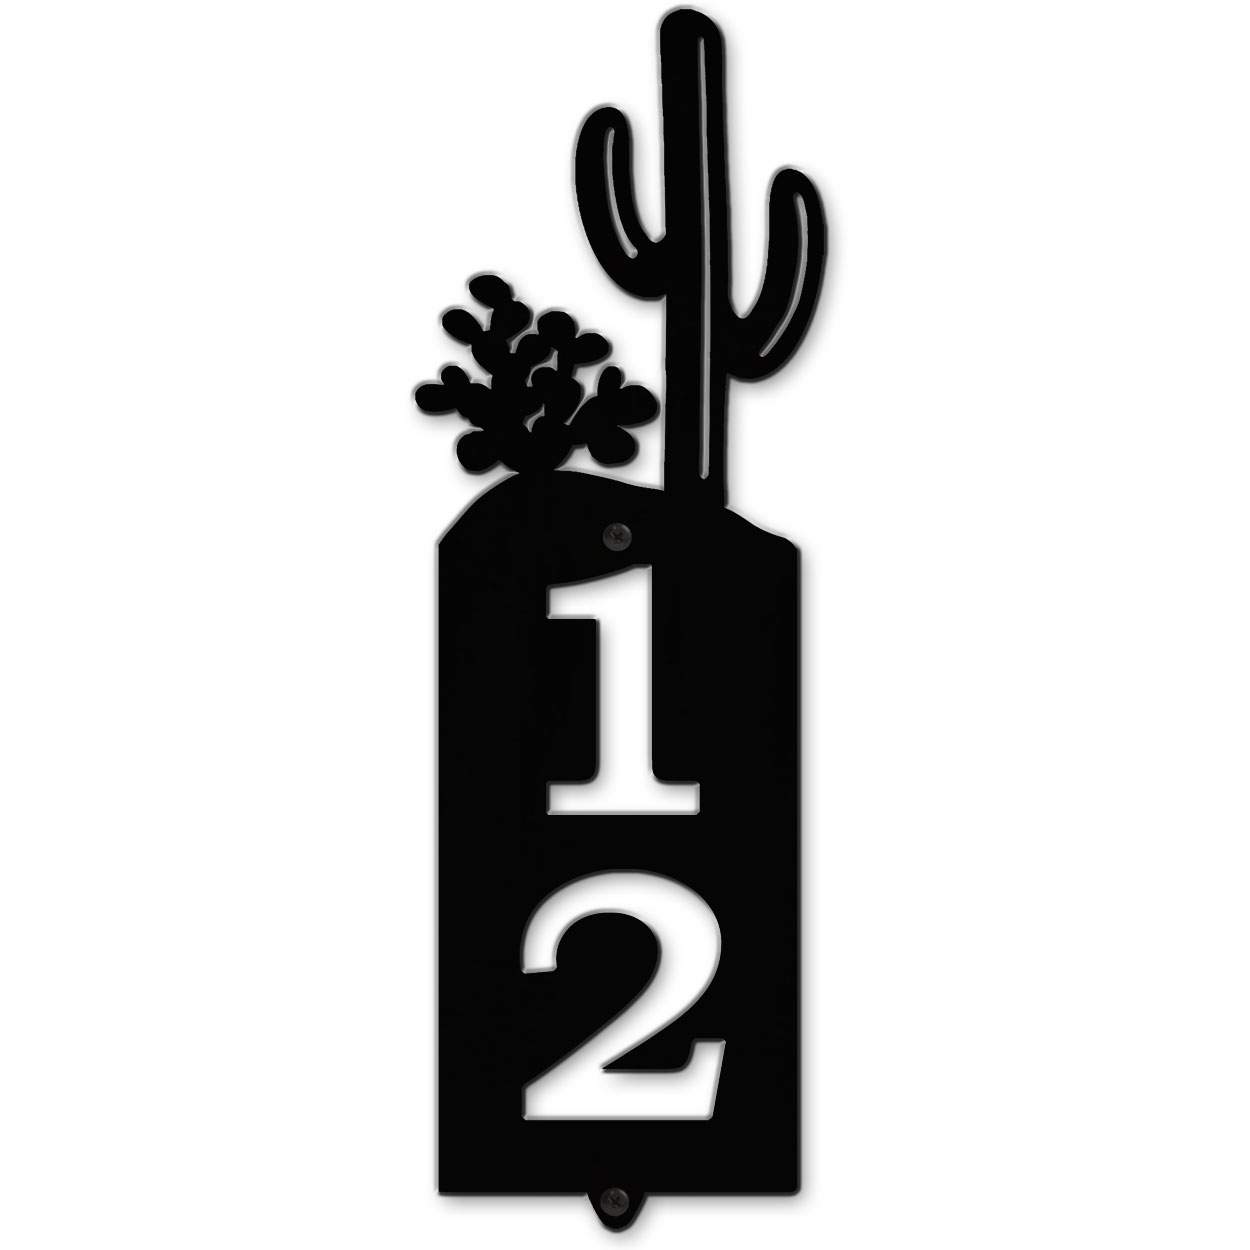 635042 - Cactus Cut Outs Two Digit Address Number Plaque